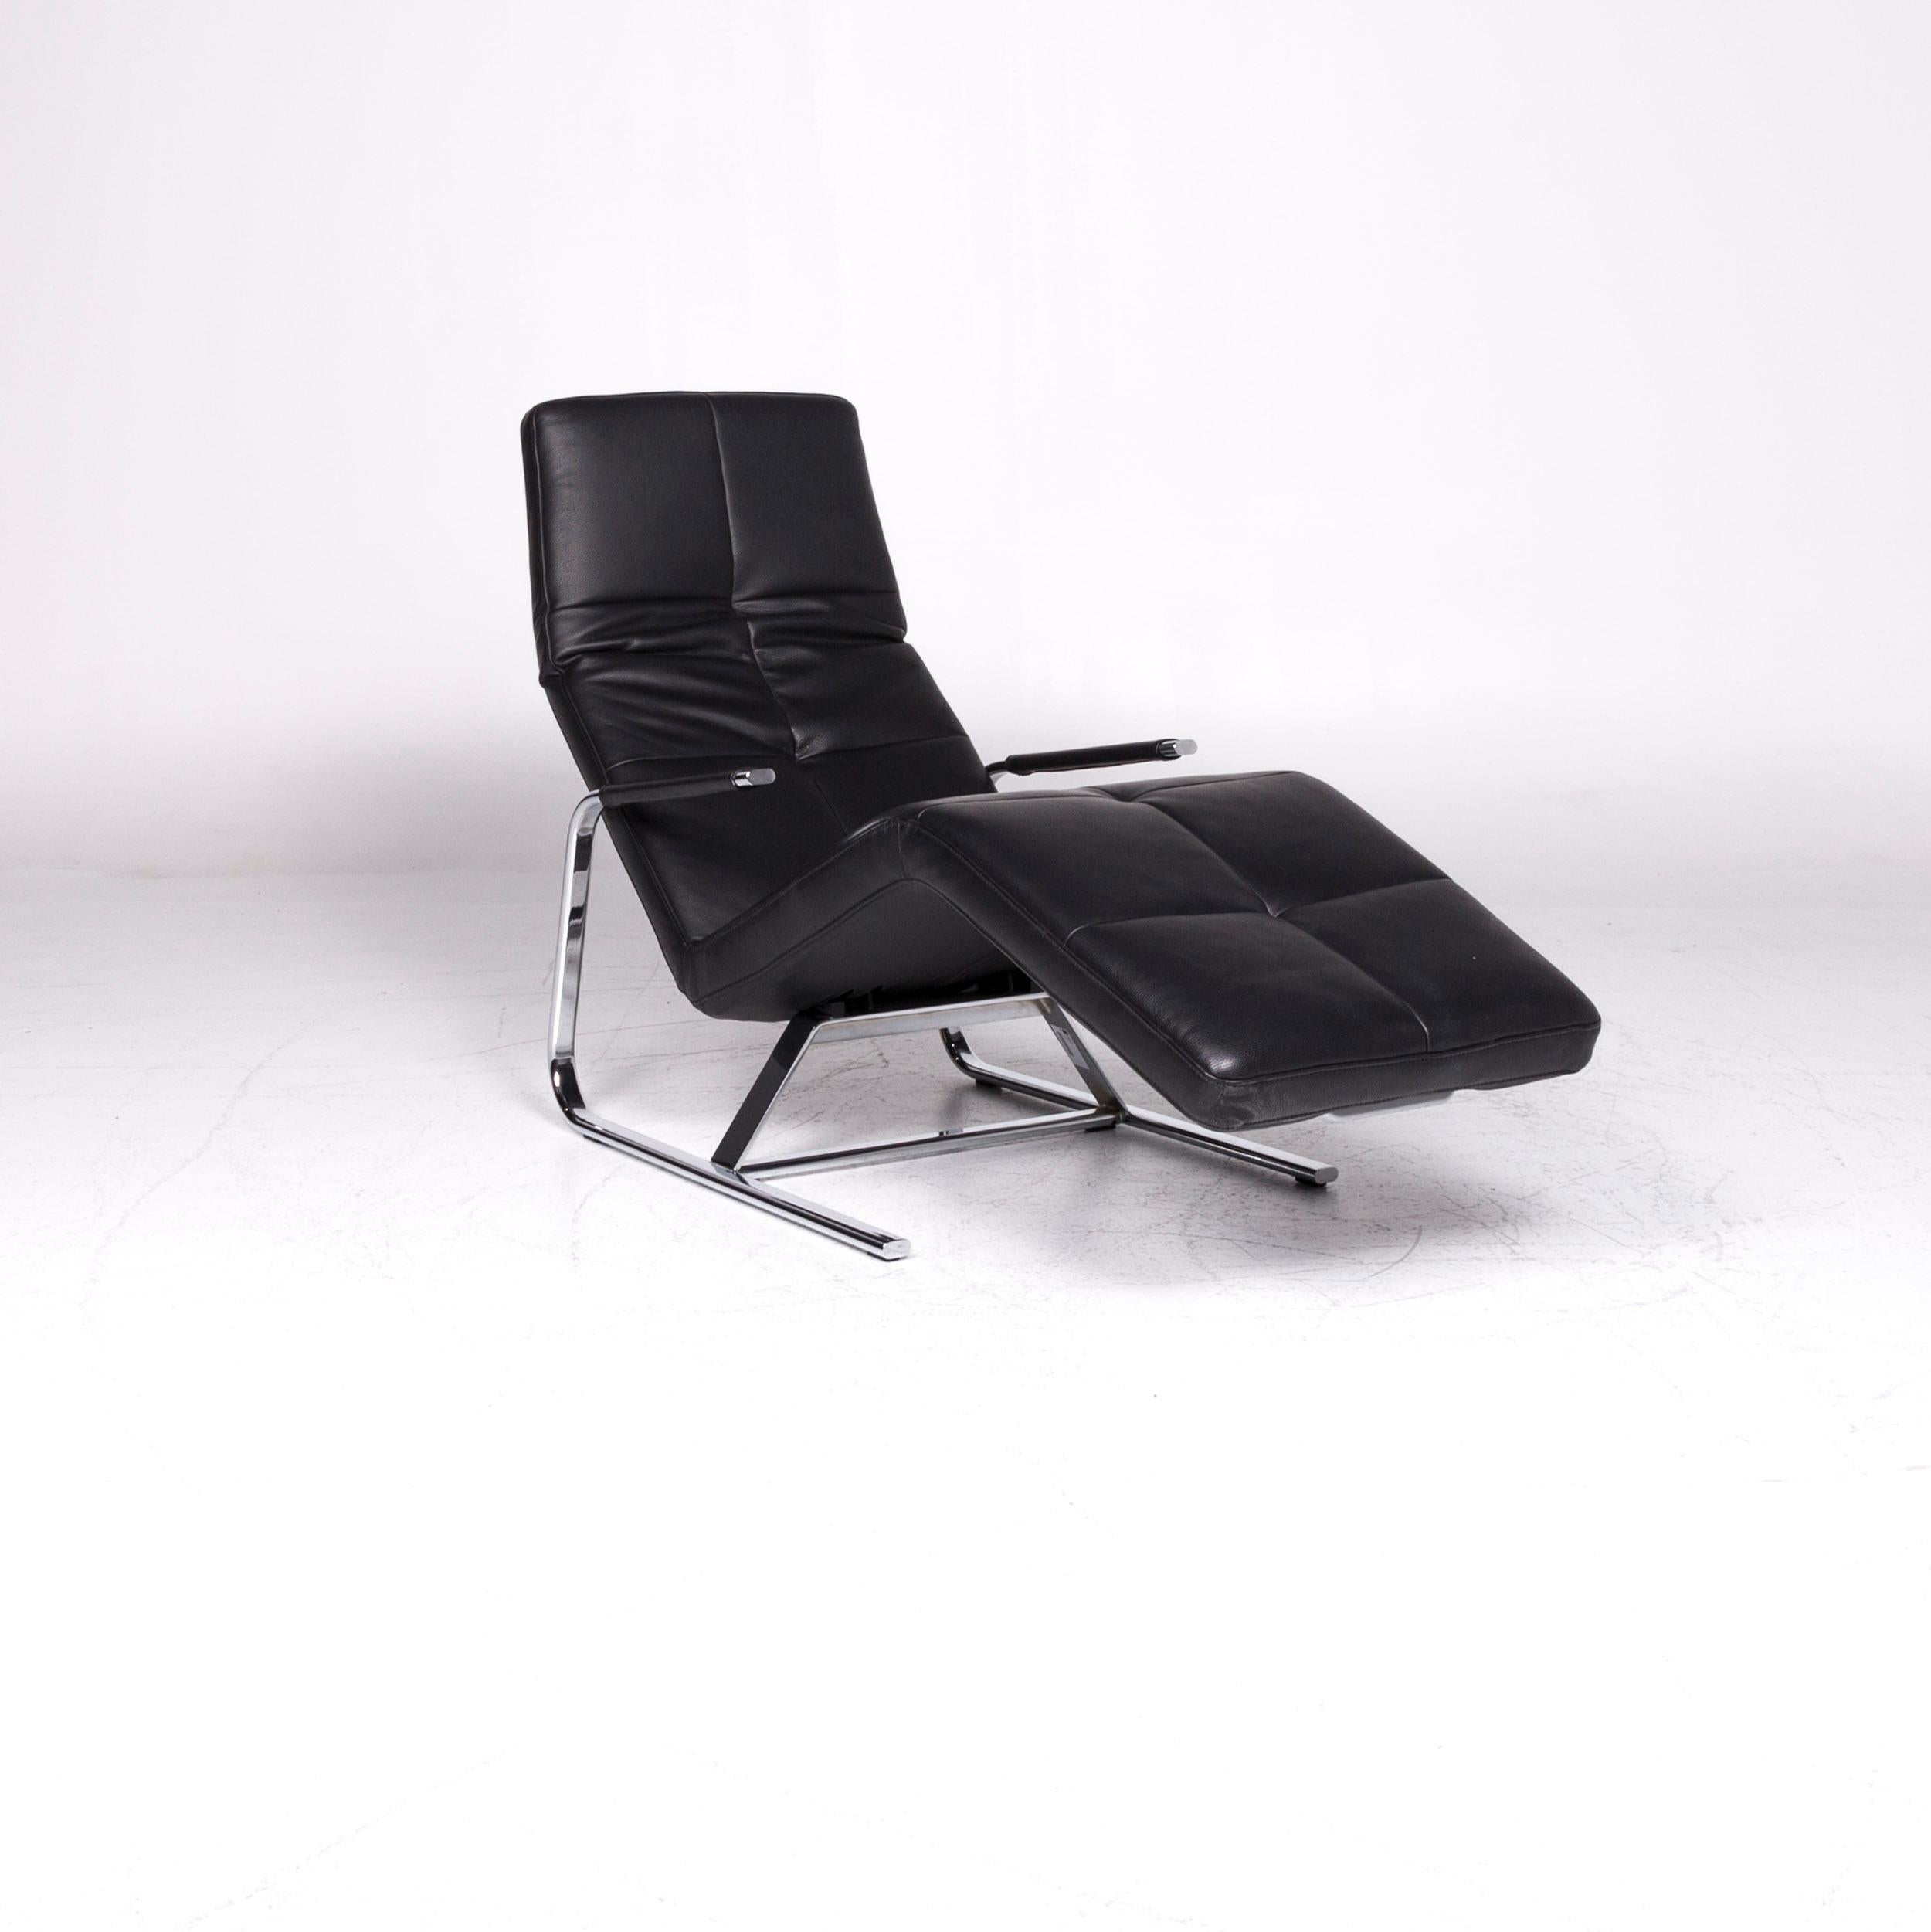 Ewald Schillig VITA Designer Leather Lounger Black Relax Function In Excellent Condition For Sale In Cologne, DE